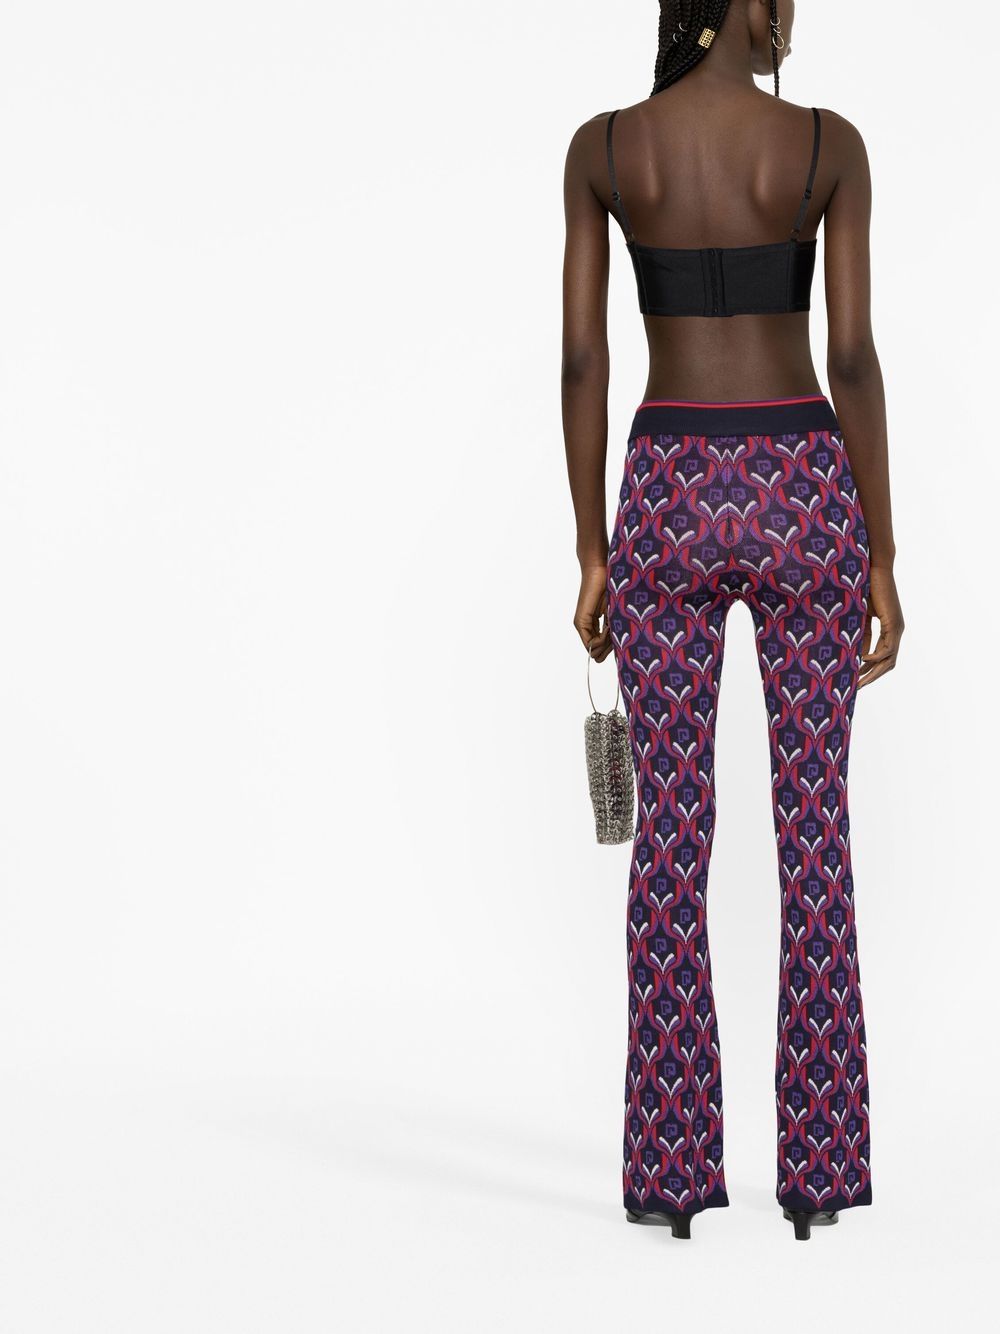 Paco Rabanne patterned-jacquard Flared Trousers - Farfetch